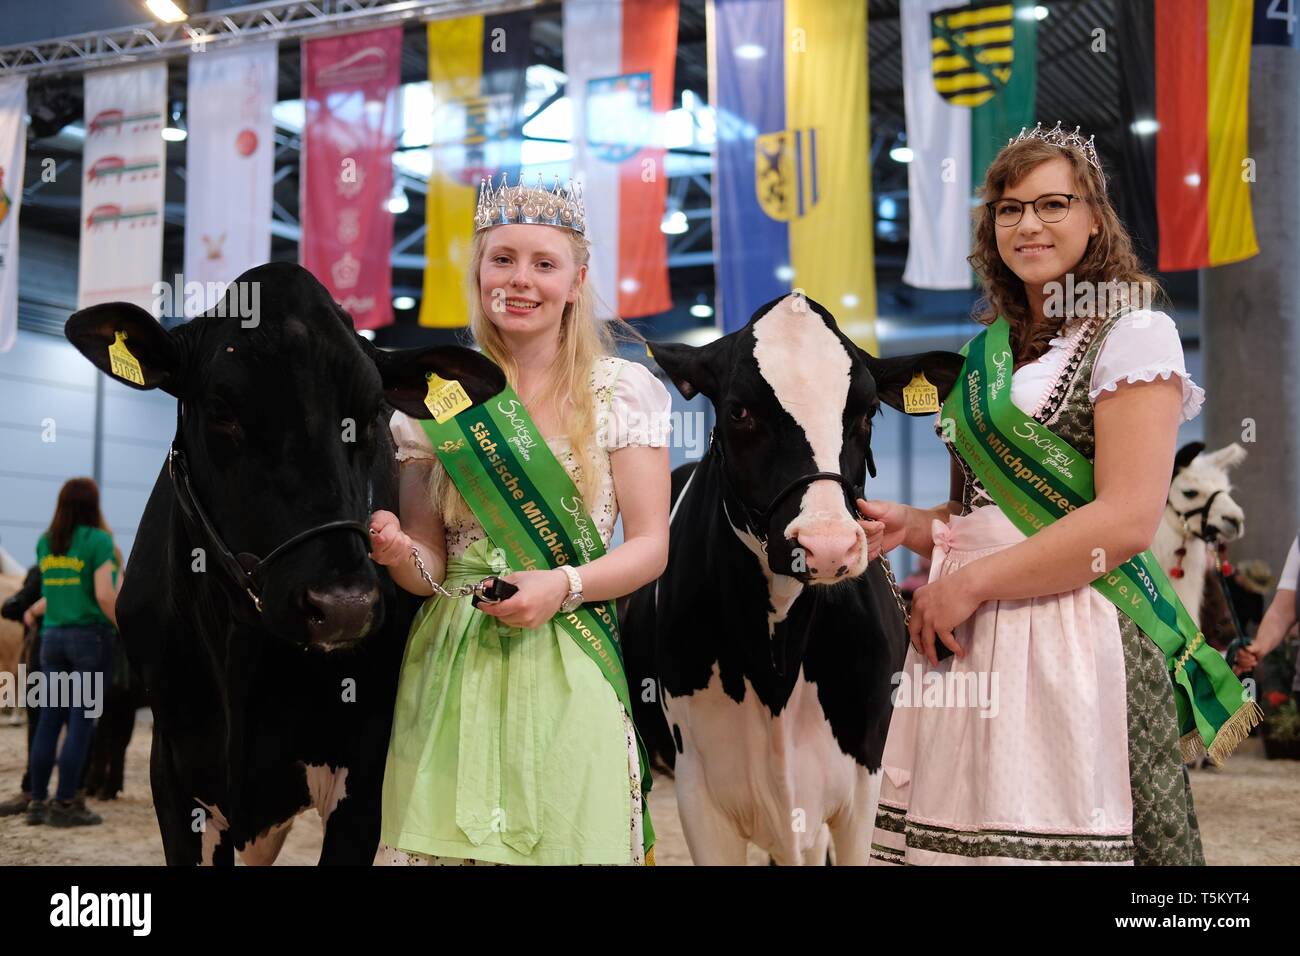 Leipzig, Germany. 25th Apr, 2019. Luisa Hochstein (l) from Schneidenbach in the Vogtland, newly elected Saxon Milk Queen, and Kim Schubert from Werndorf near Glauchau, who was elected Saxon Milk Princess, are standing in a hall of the Leipzig Trade Fair during the agricultural exhibition Agra. Until 28.04.2019, 1,200 exhibitors will be explaining agricultural, forestry and food industry topics. Credit: Sebastian Willnow/dpa-Zentralbild/ZB/dpa/Alamy Live News Stock Photo